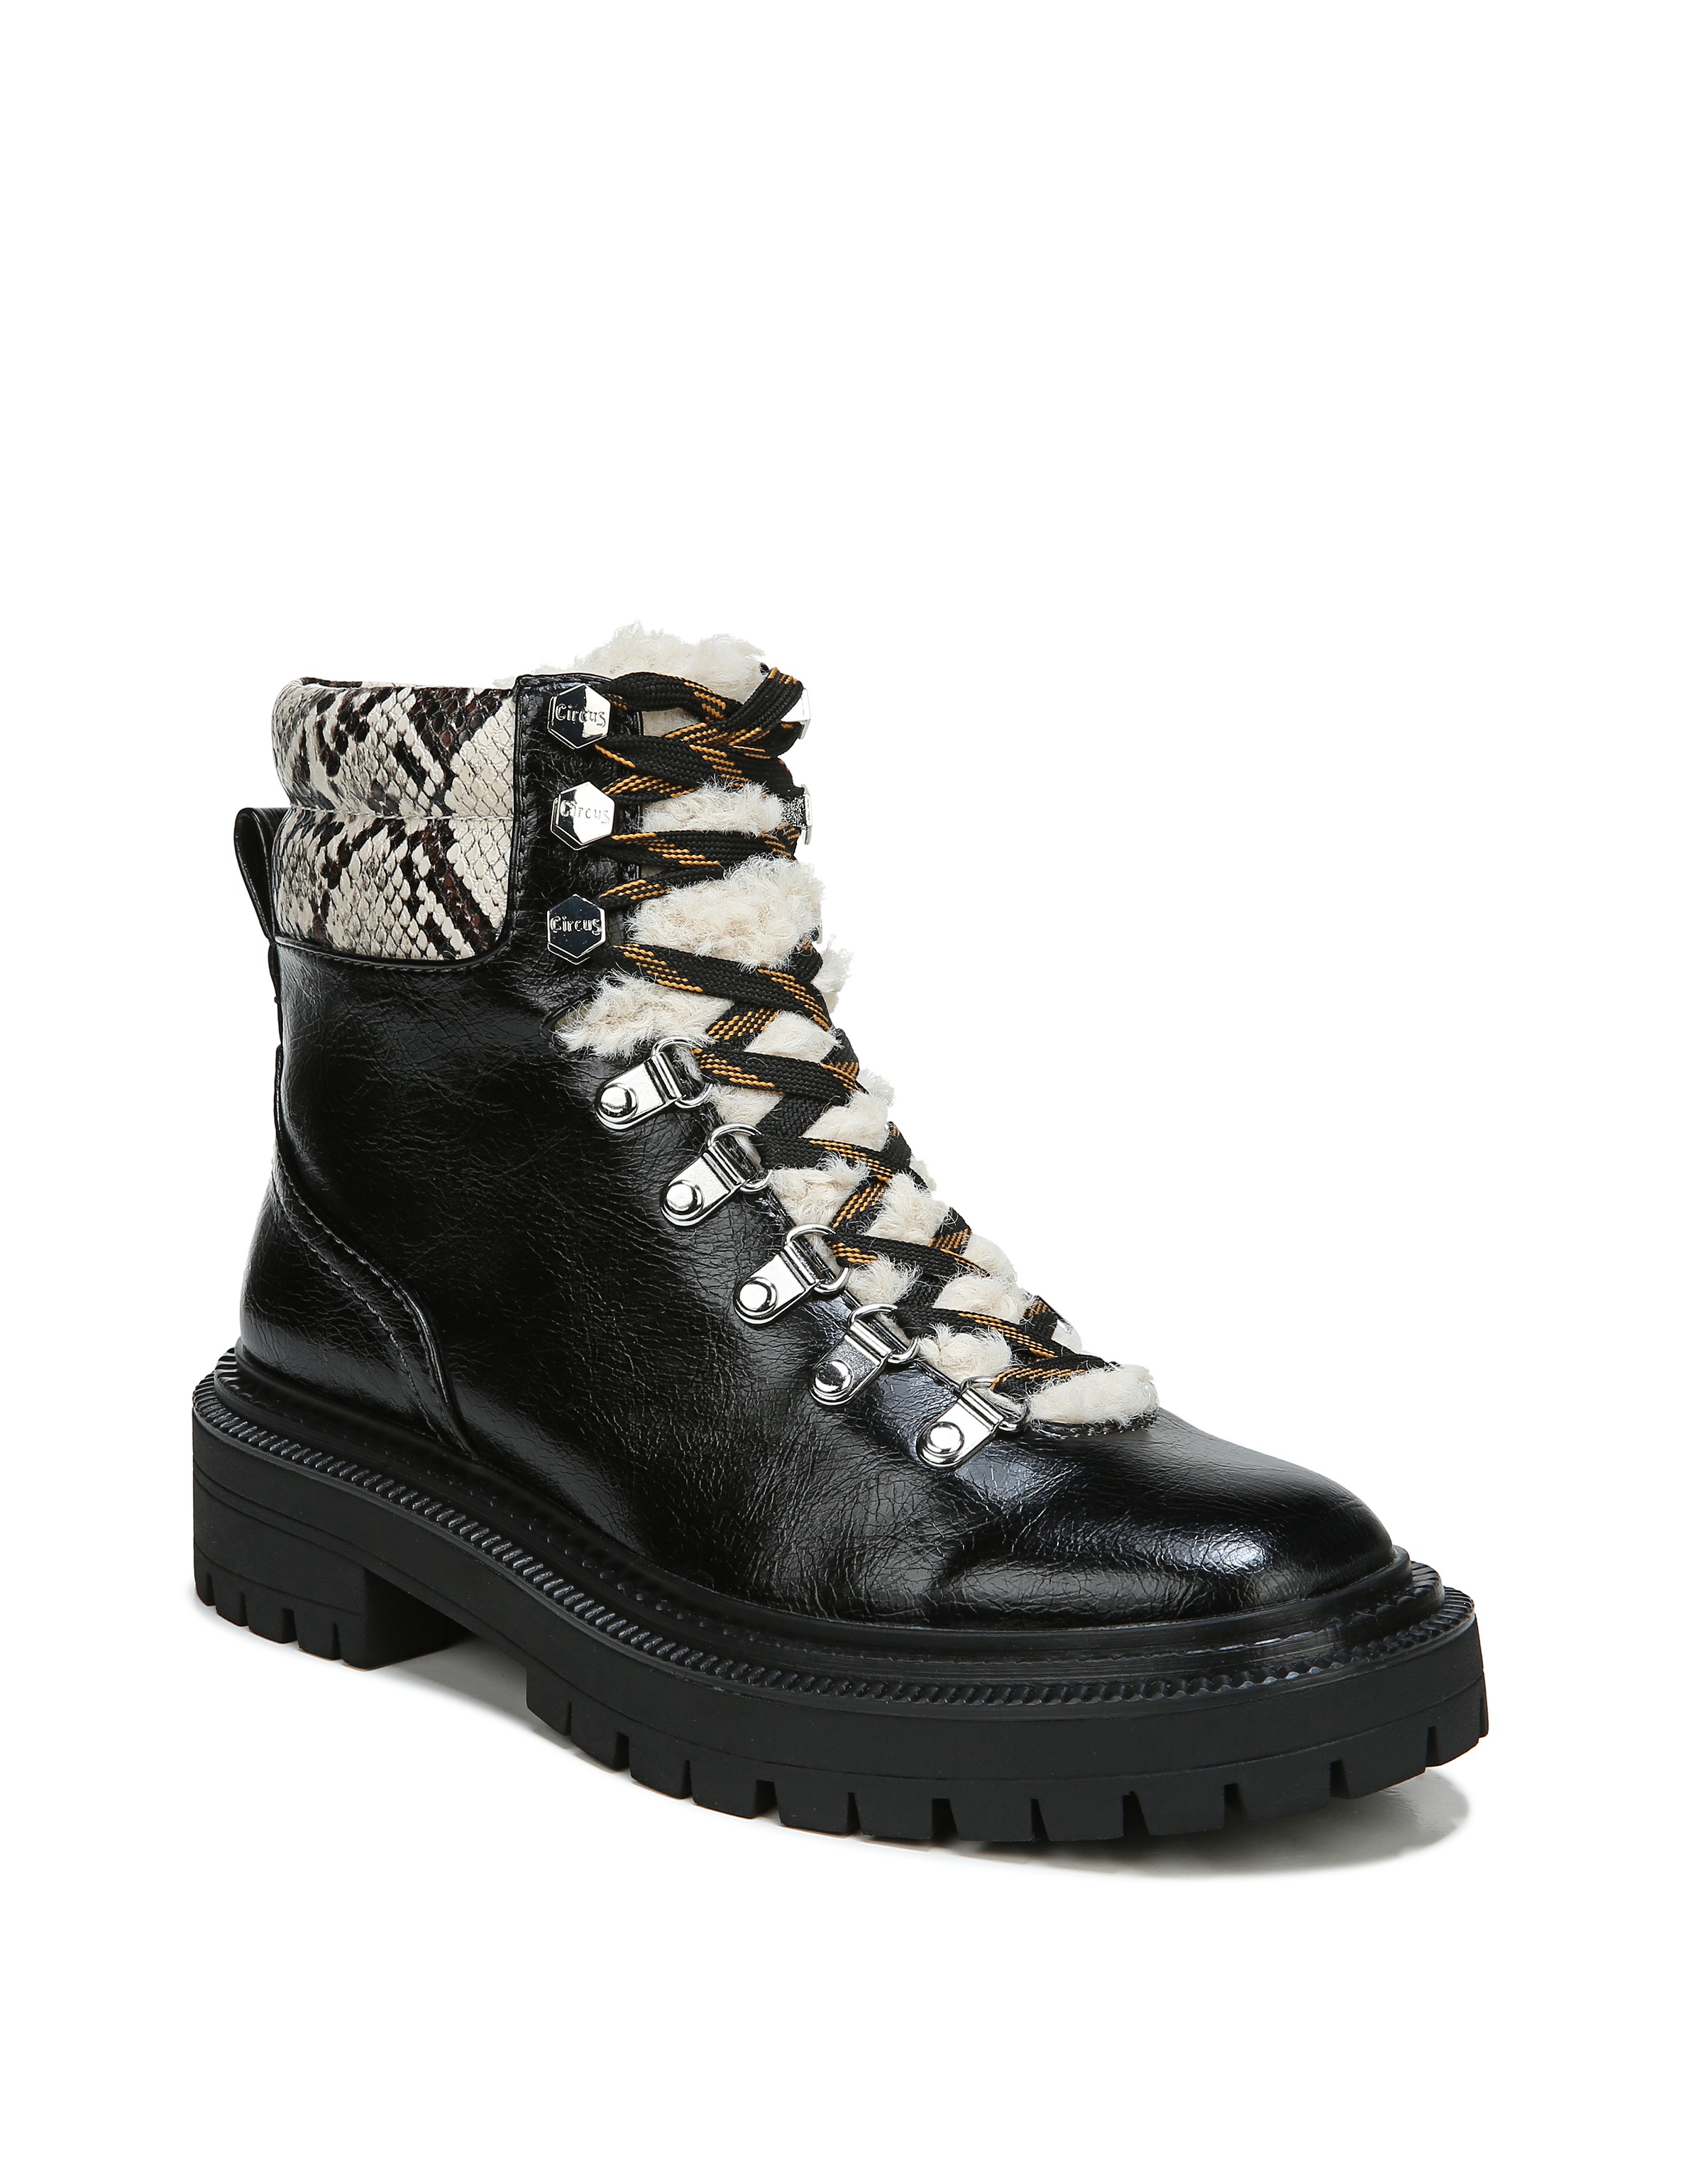 Circus by Sam Edelman Flora Shearling Hiker Boot (Women's) - image 1 of 6